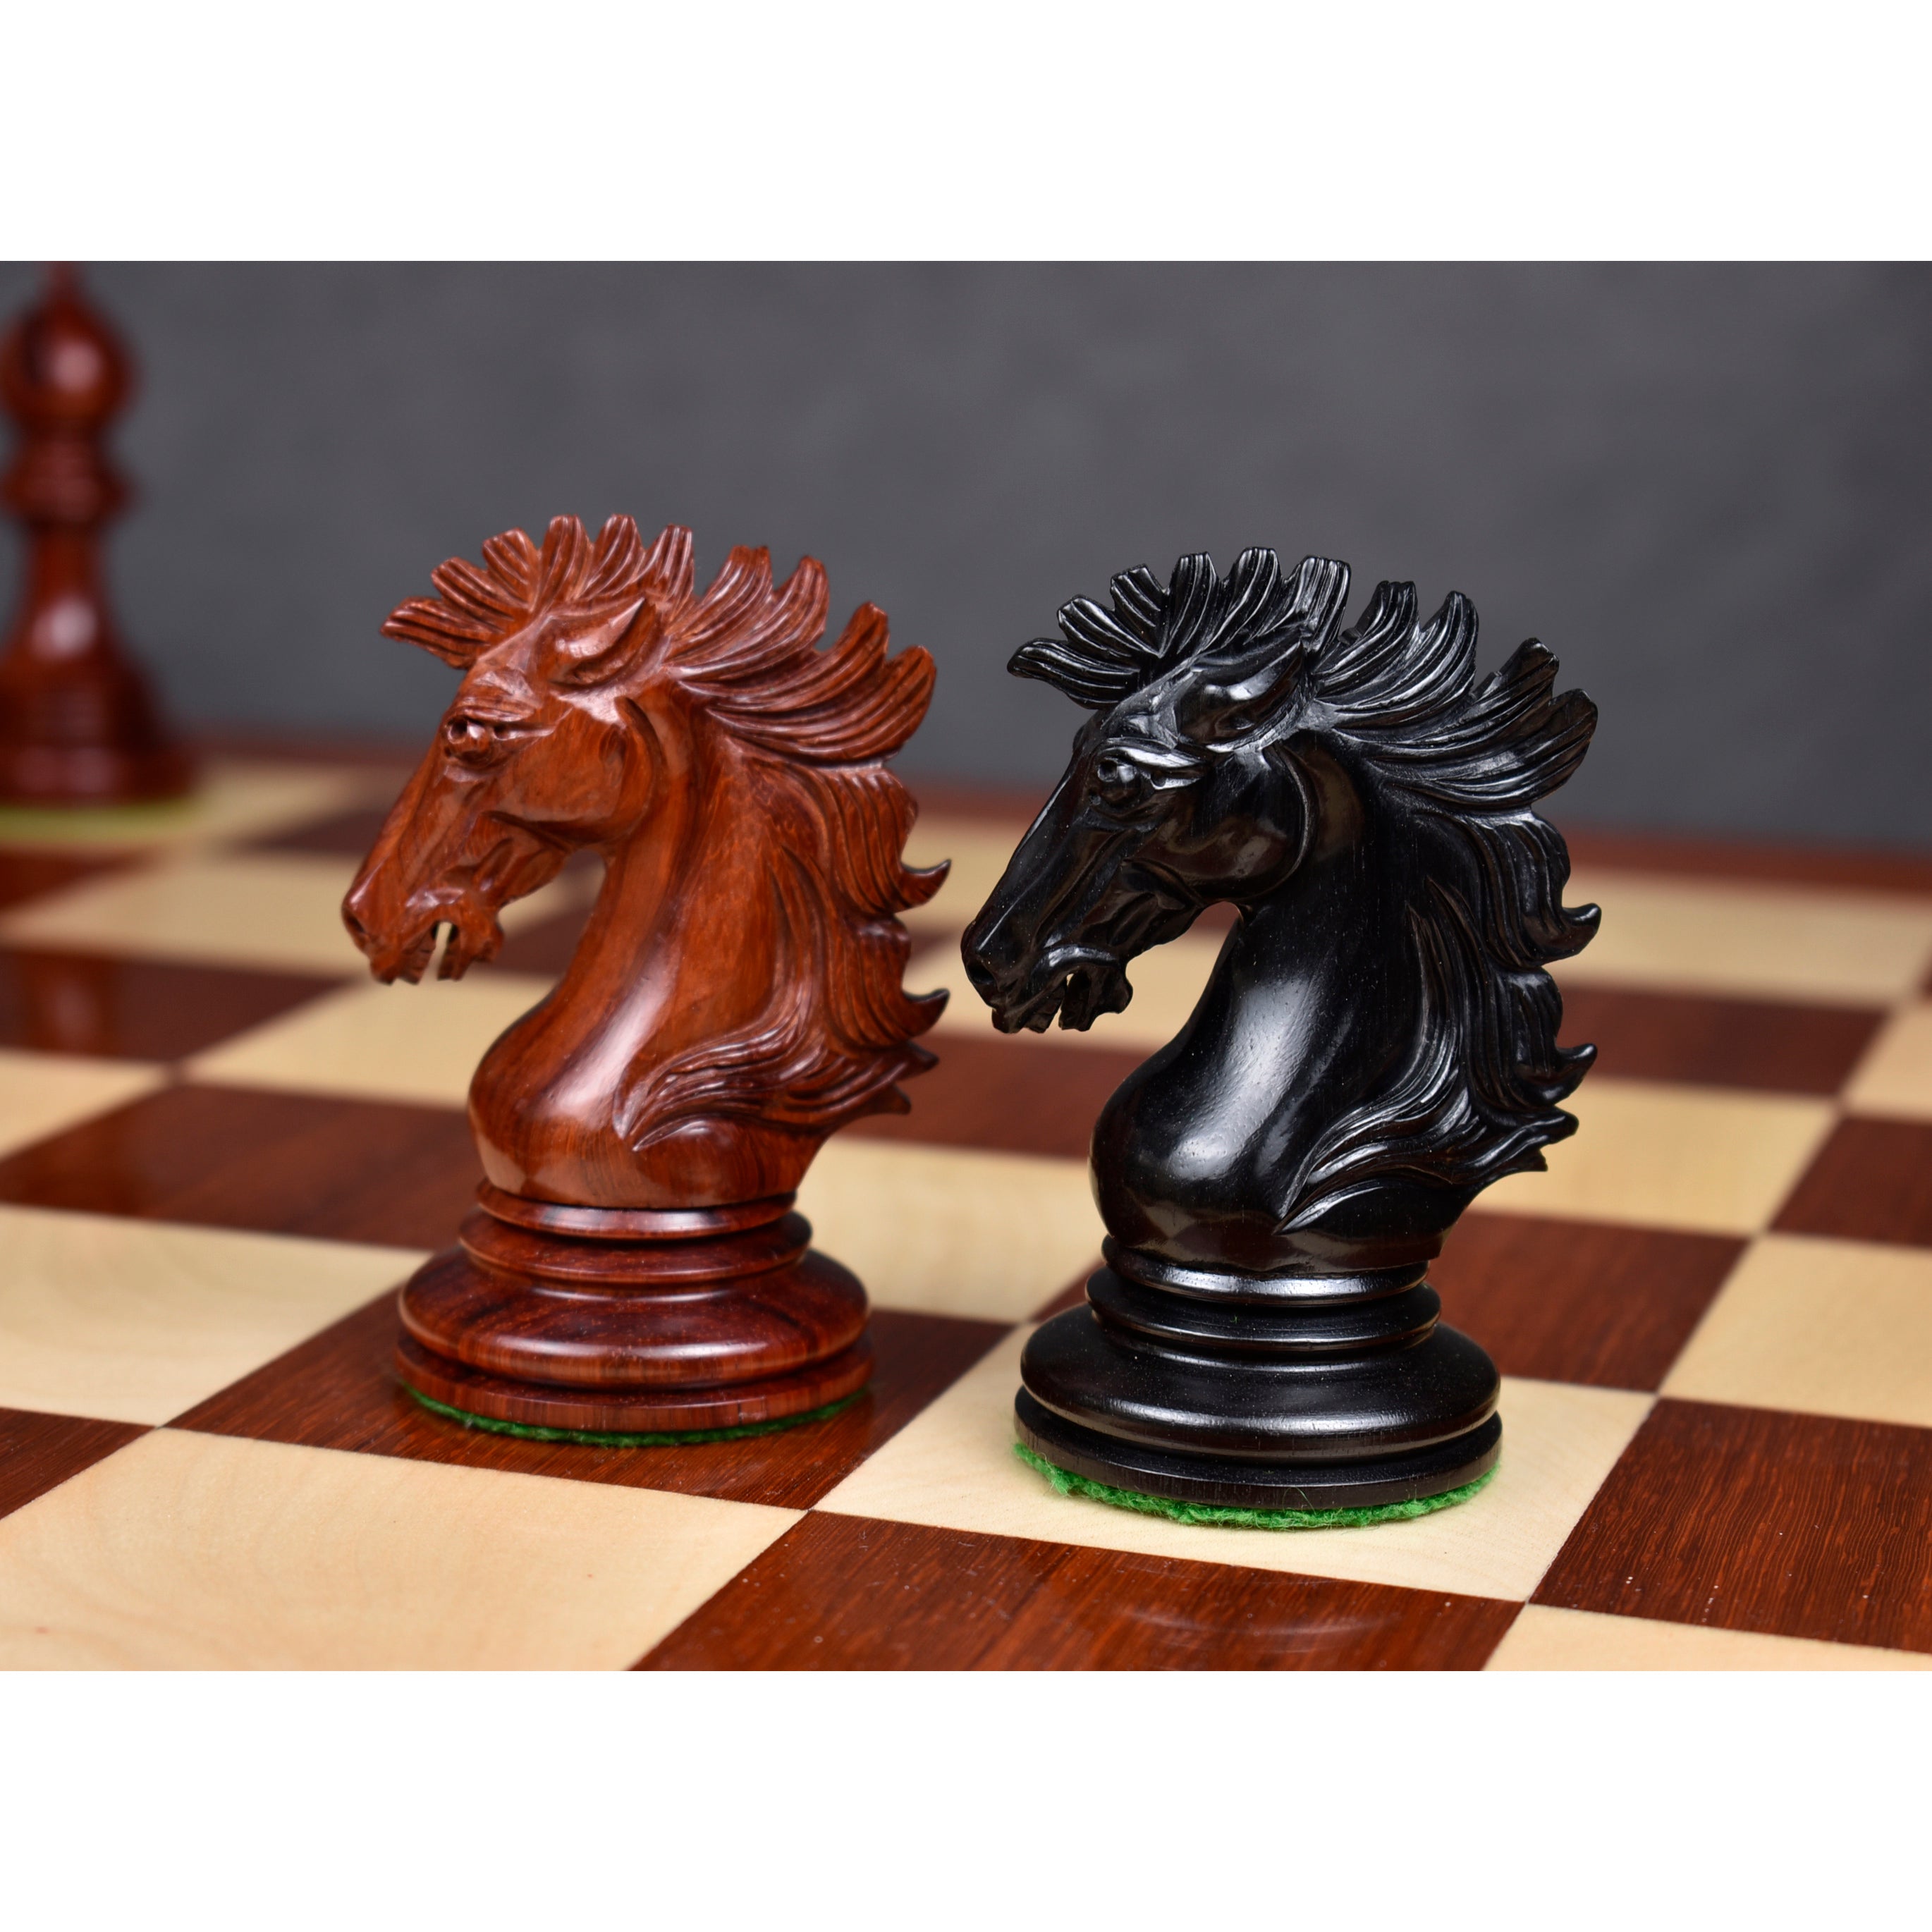 Alexandria Luxury Staunton Chess Set- Chess Pieces Only - Triple Weighted - Ebony & Bud Rosewood